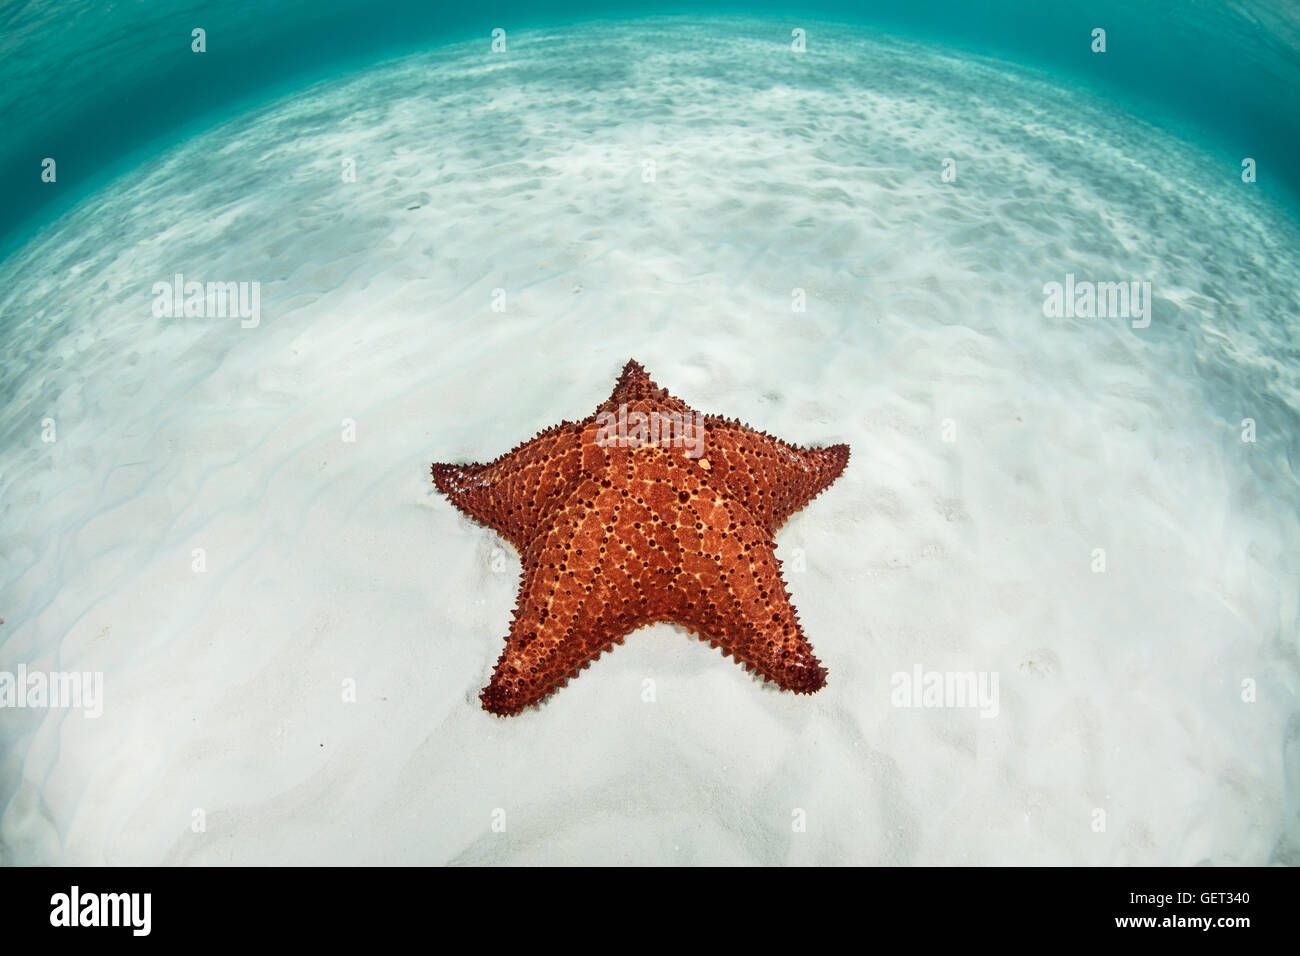 A colorful West Indian sea star (Oreaster reticulatus) lays on the shallow, sandy seafloor of the Caribbean Sea. Stock Photo